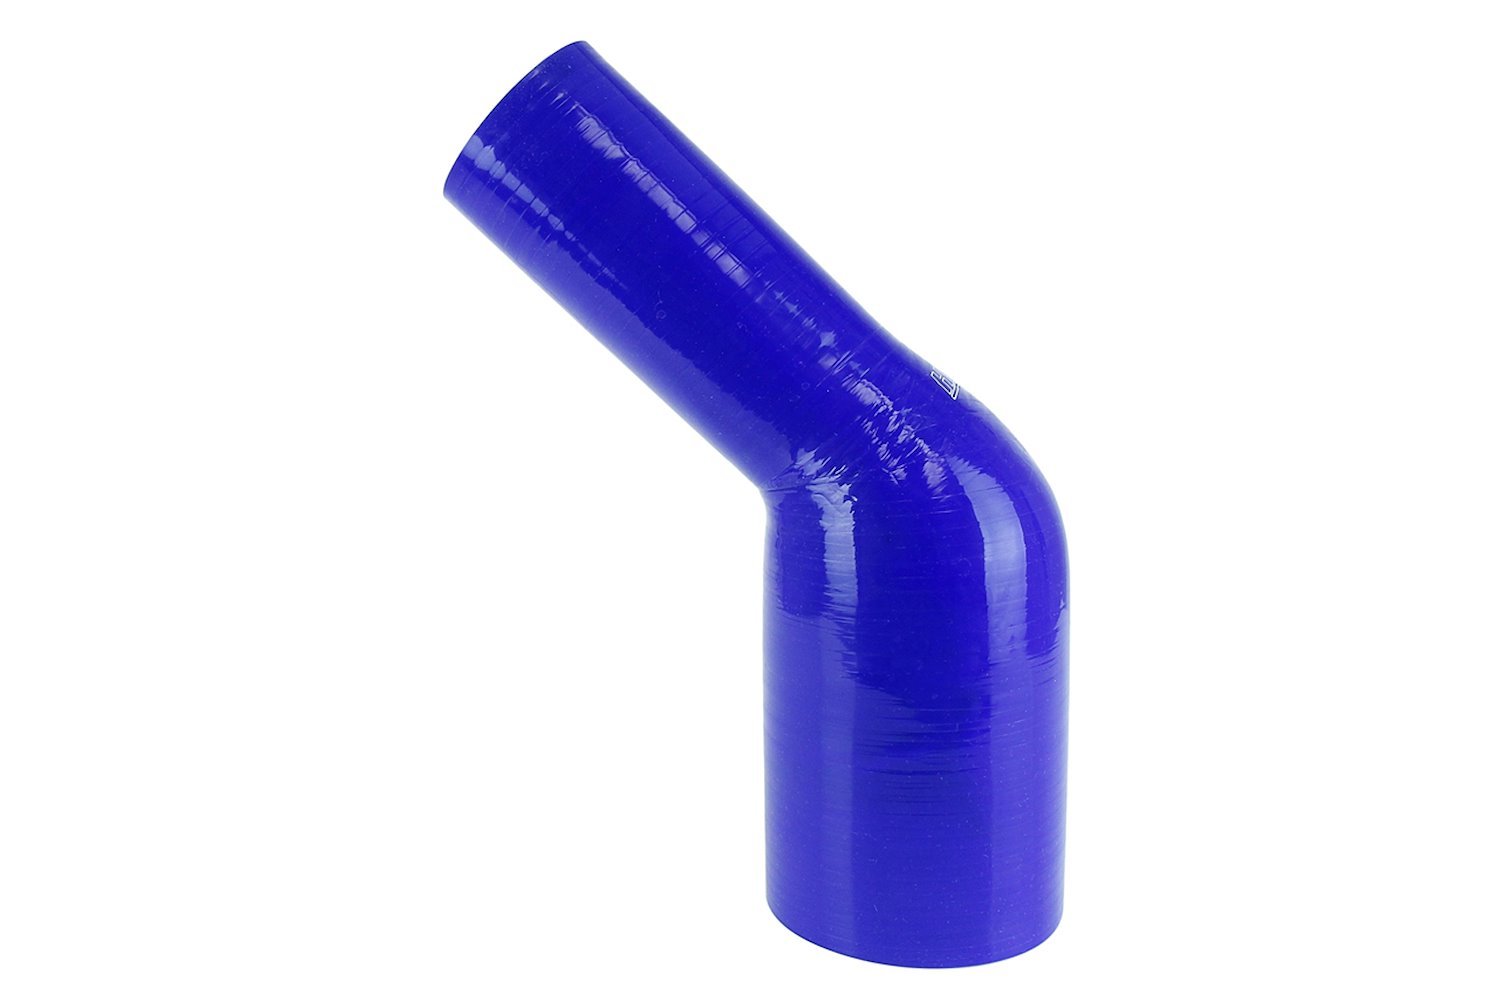 HTSER45-275-312-BLUE Silicone 45-Degree Elbow Hose, High-Temp 4-Ply Reinforced, 2-3/4 in. - 3-1/8 in. ID, Blue